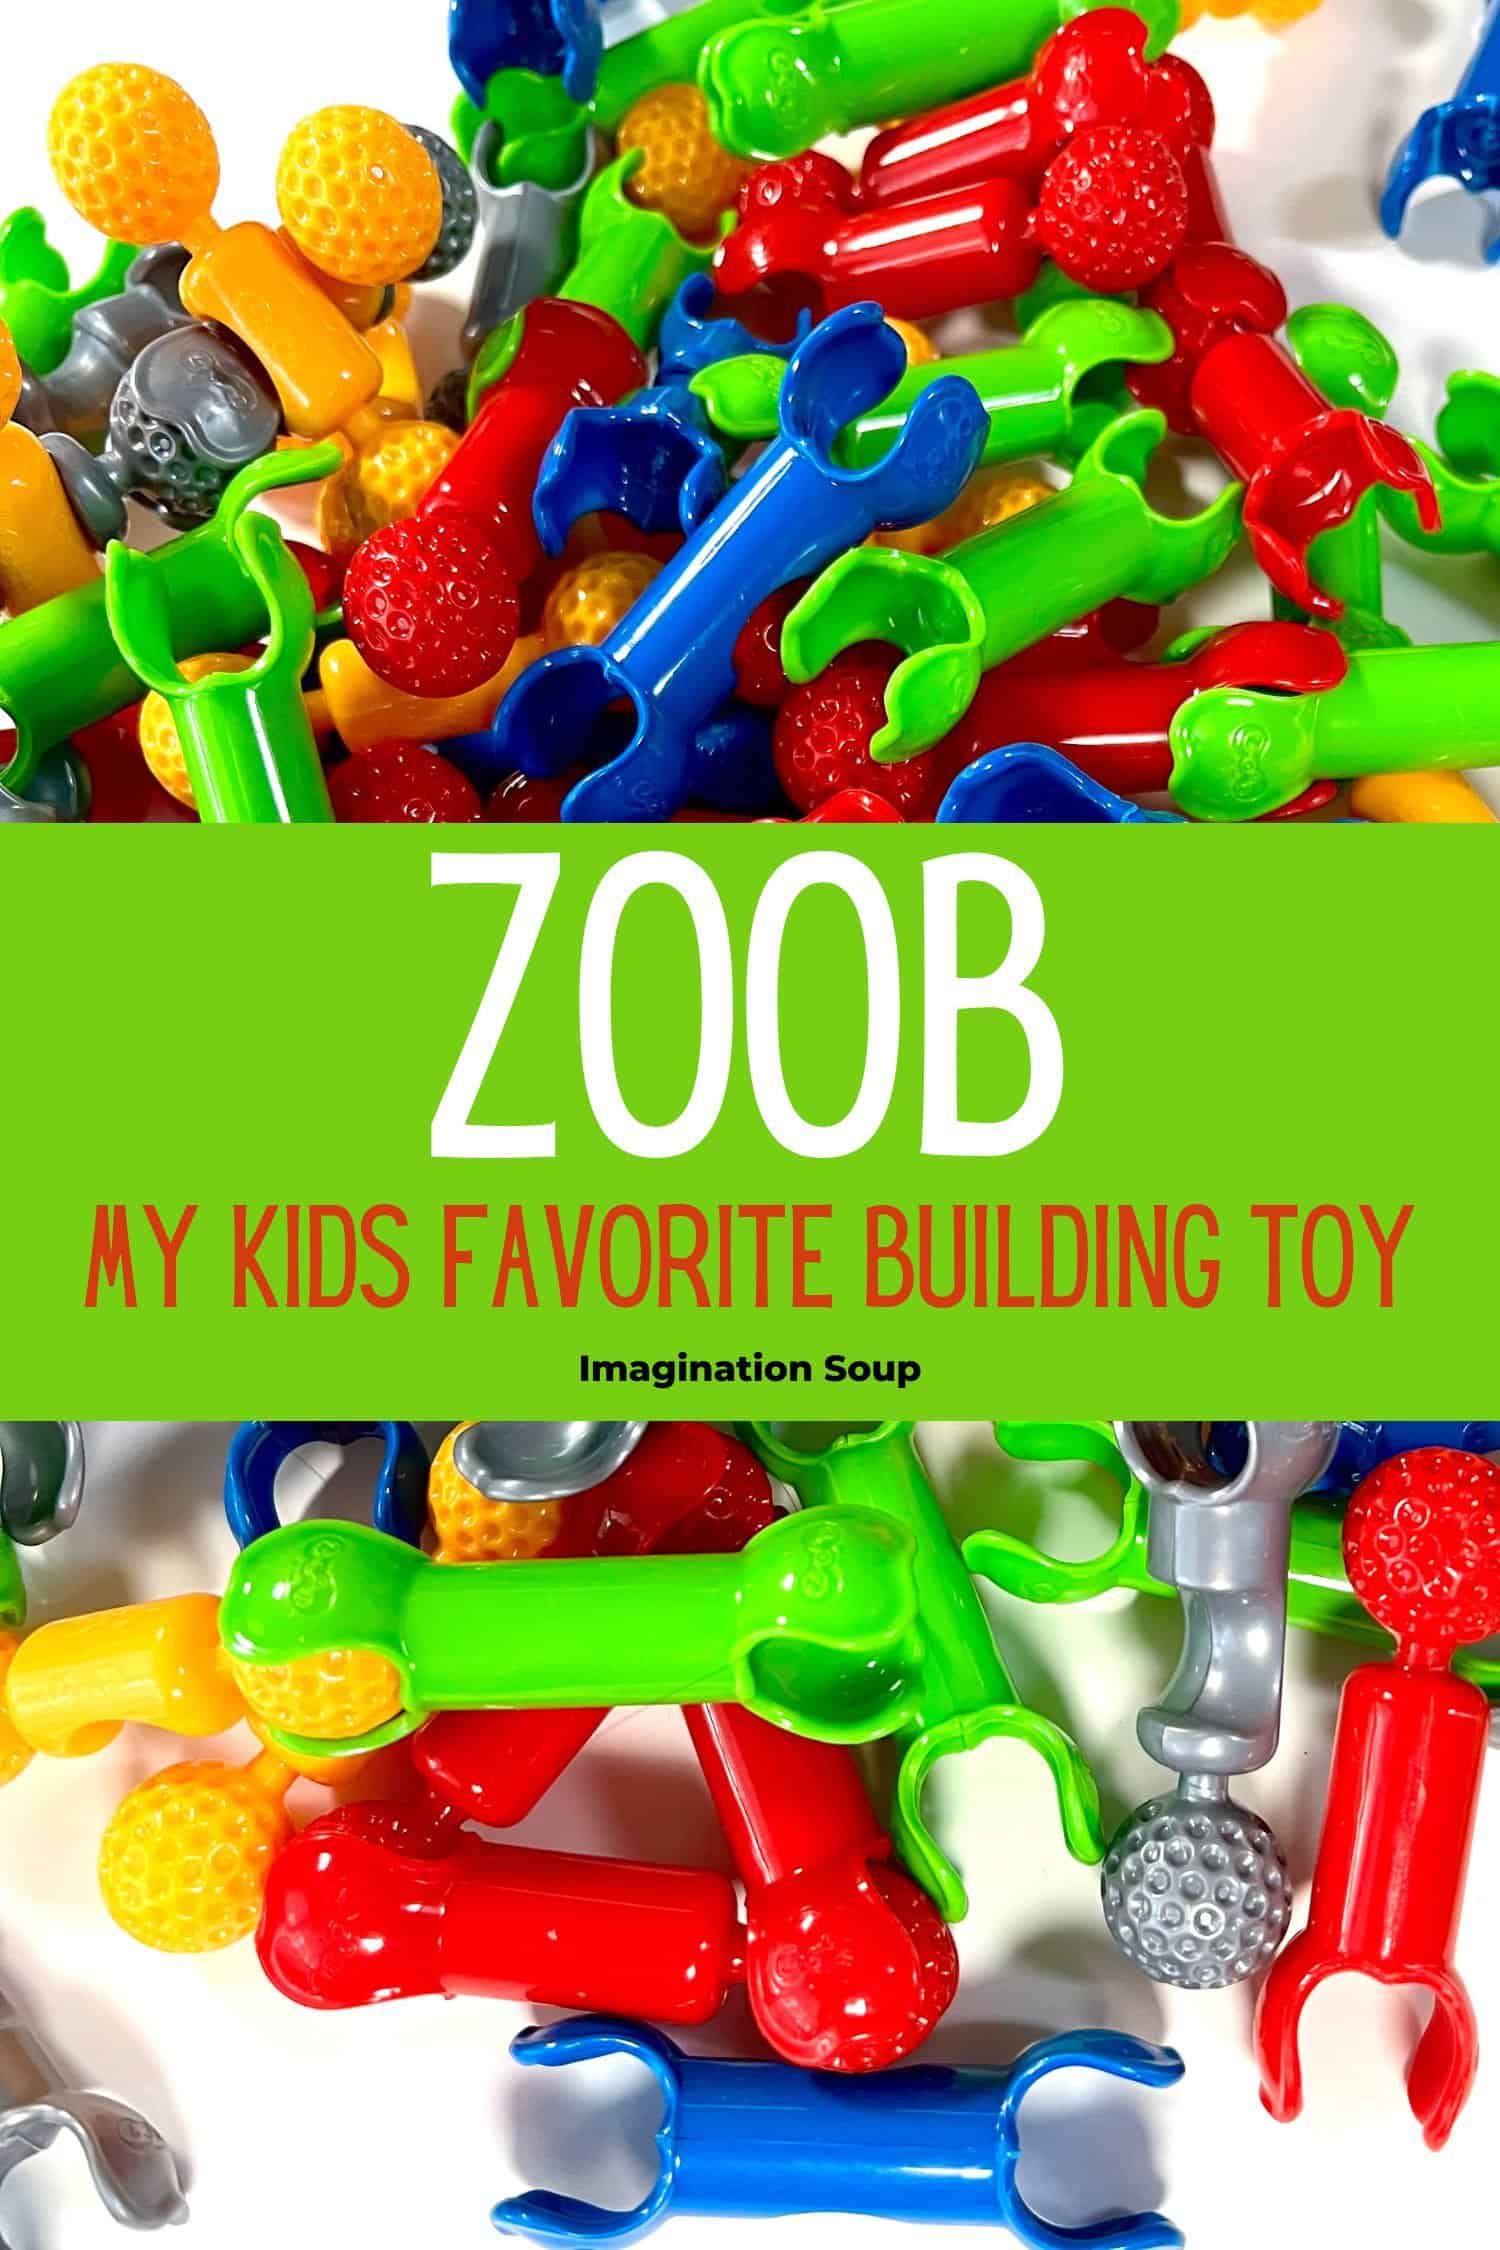 zoob building toy for kids